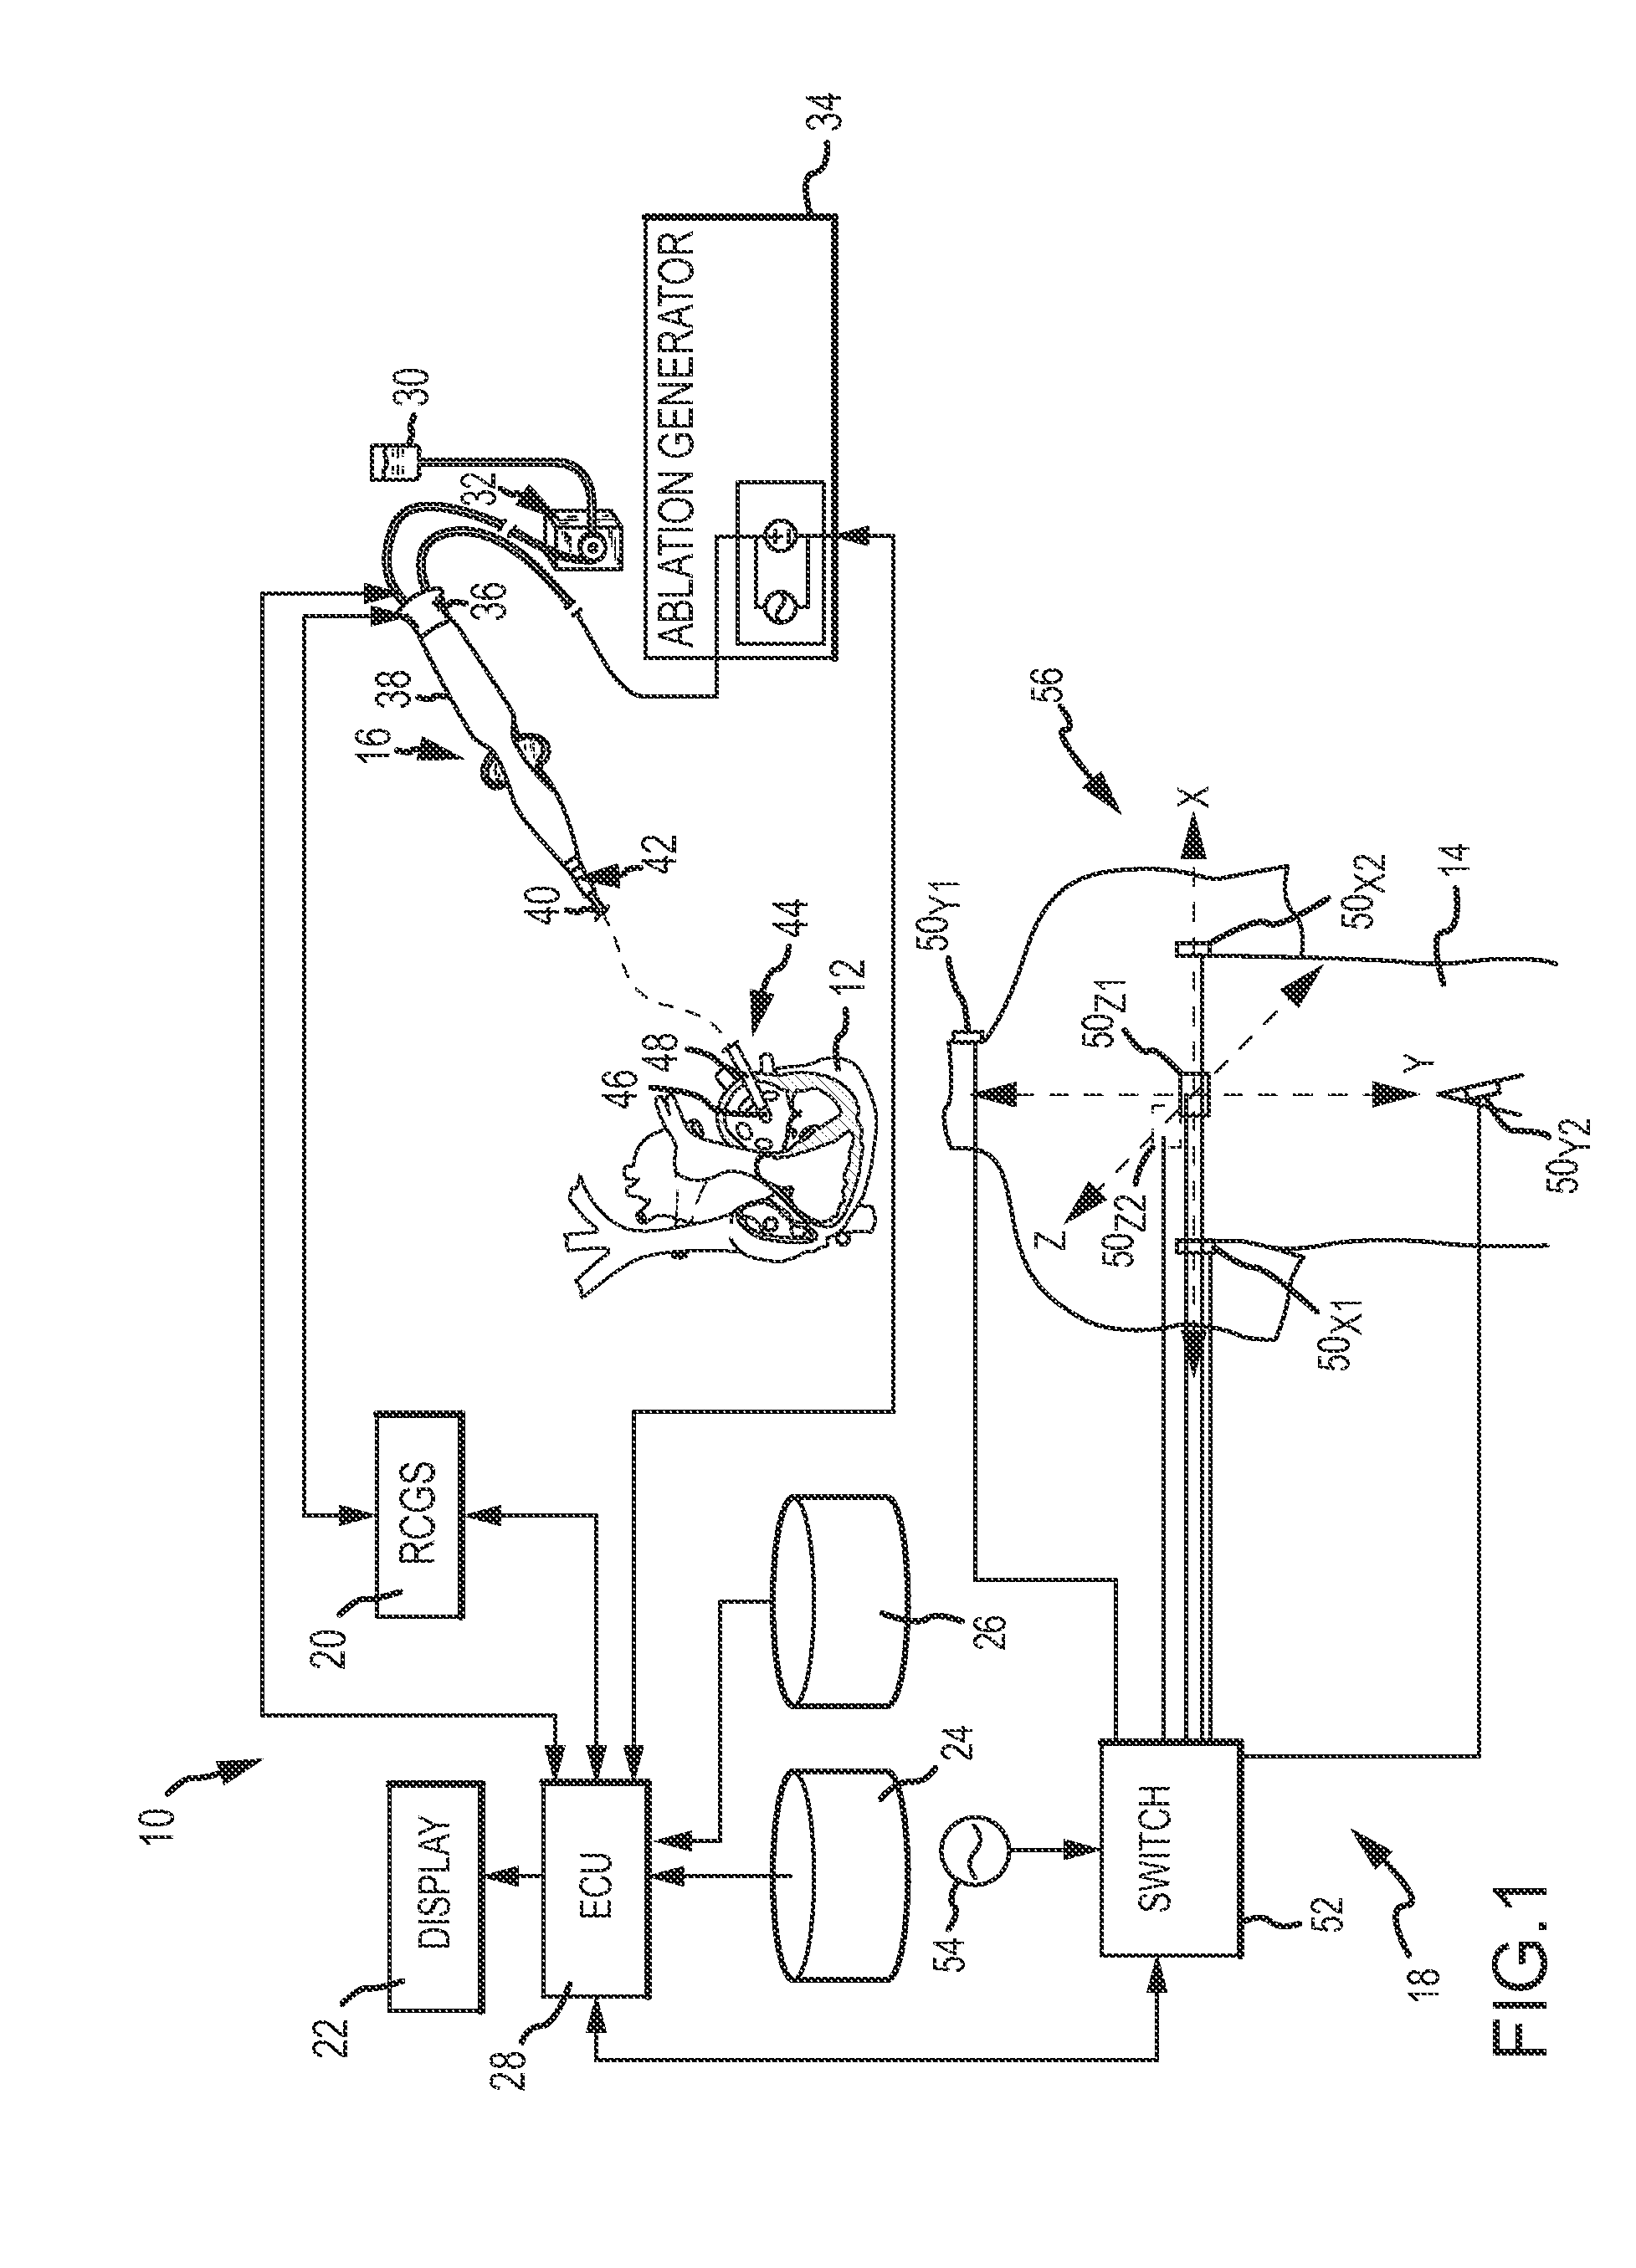 Catheter configuration interface and related system